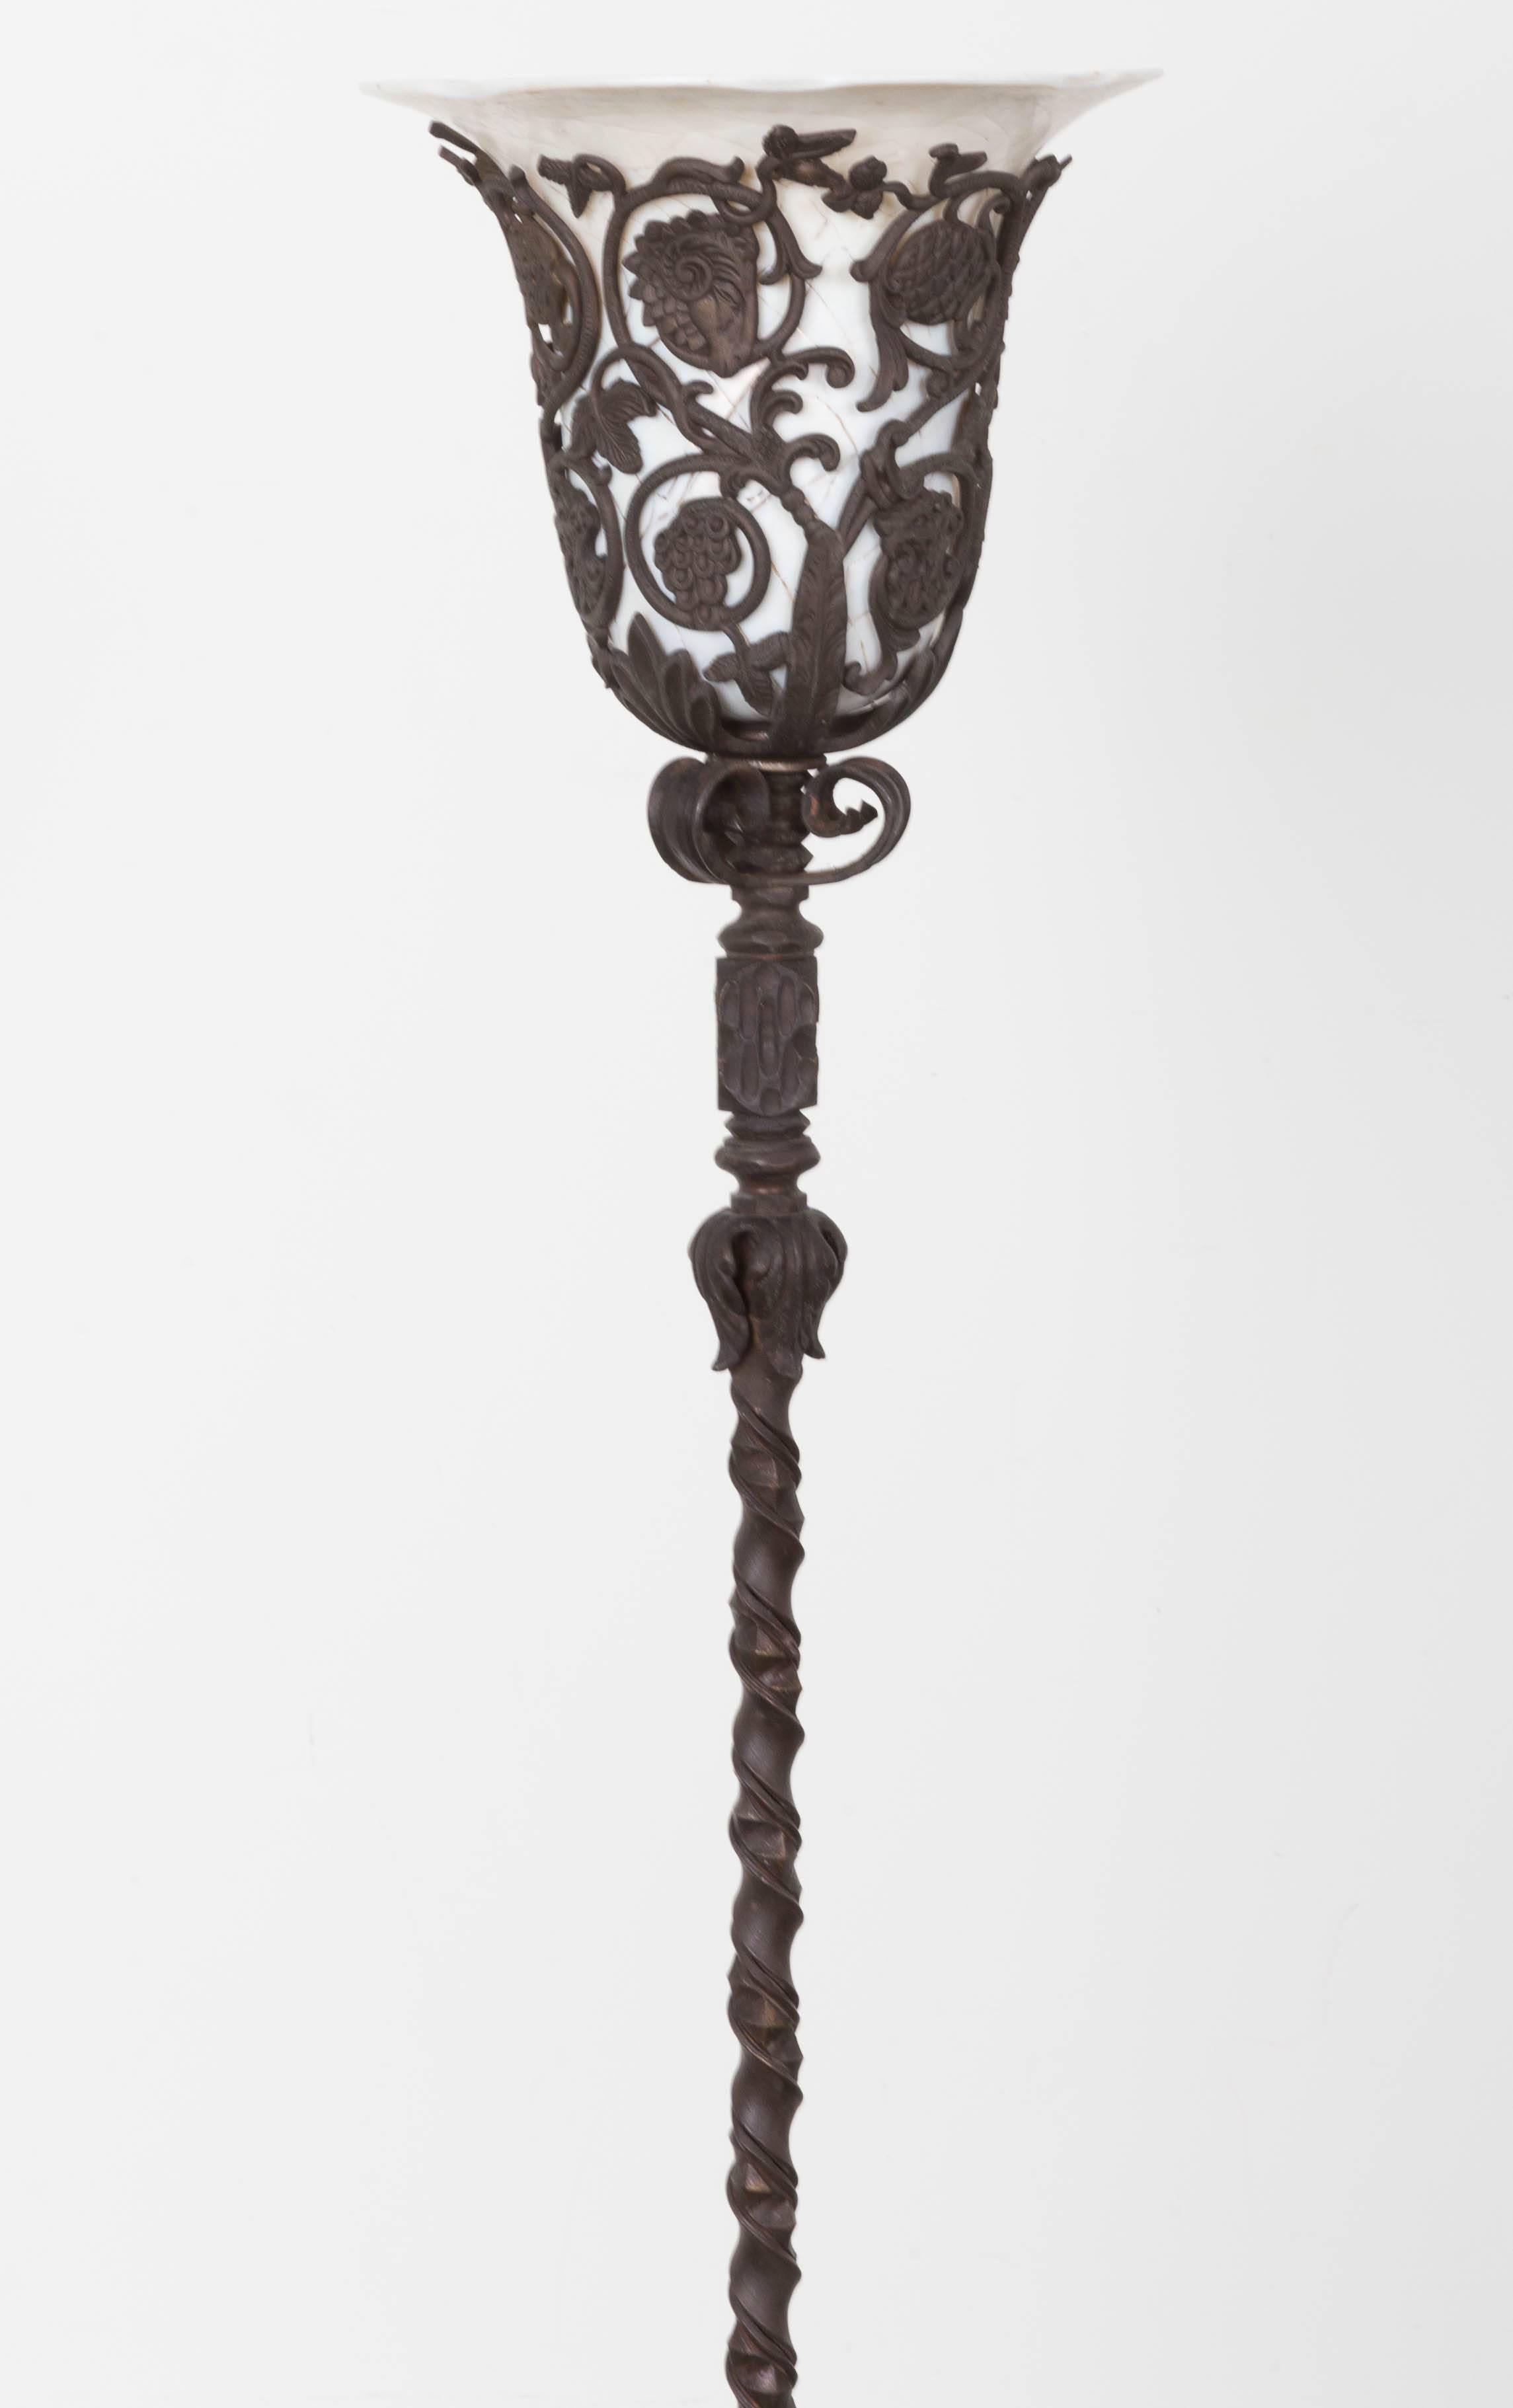 Floor lamp with twisted iron column supporting reticulated floral torchiere with faux marble shades in ivorine glass with craquelure treatment on the angular base.